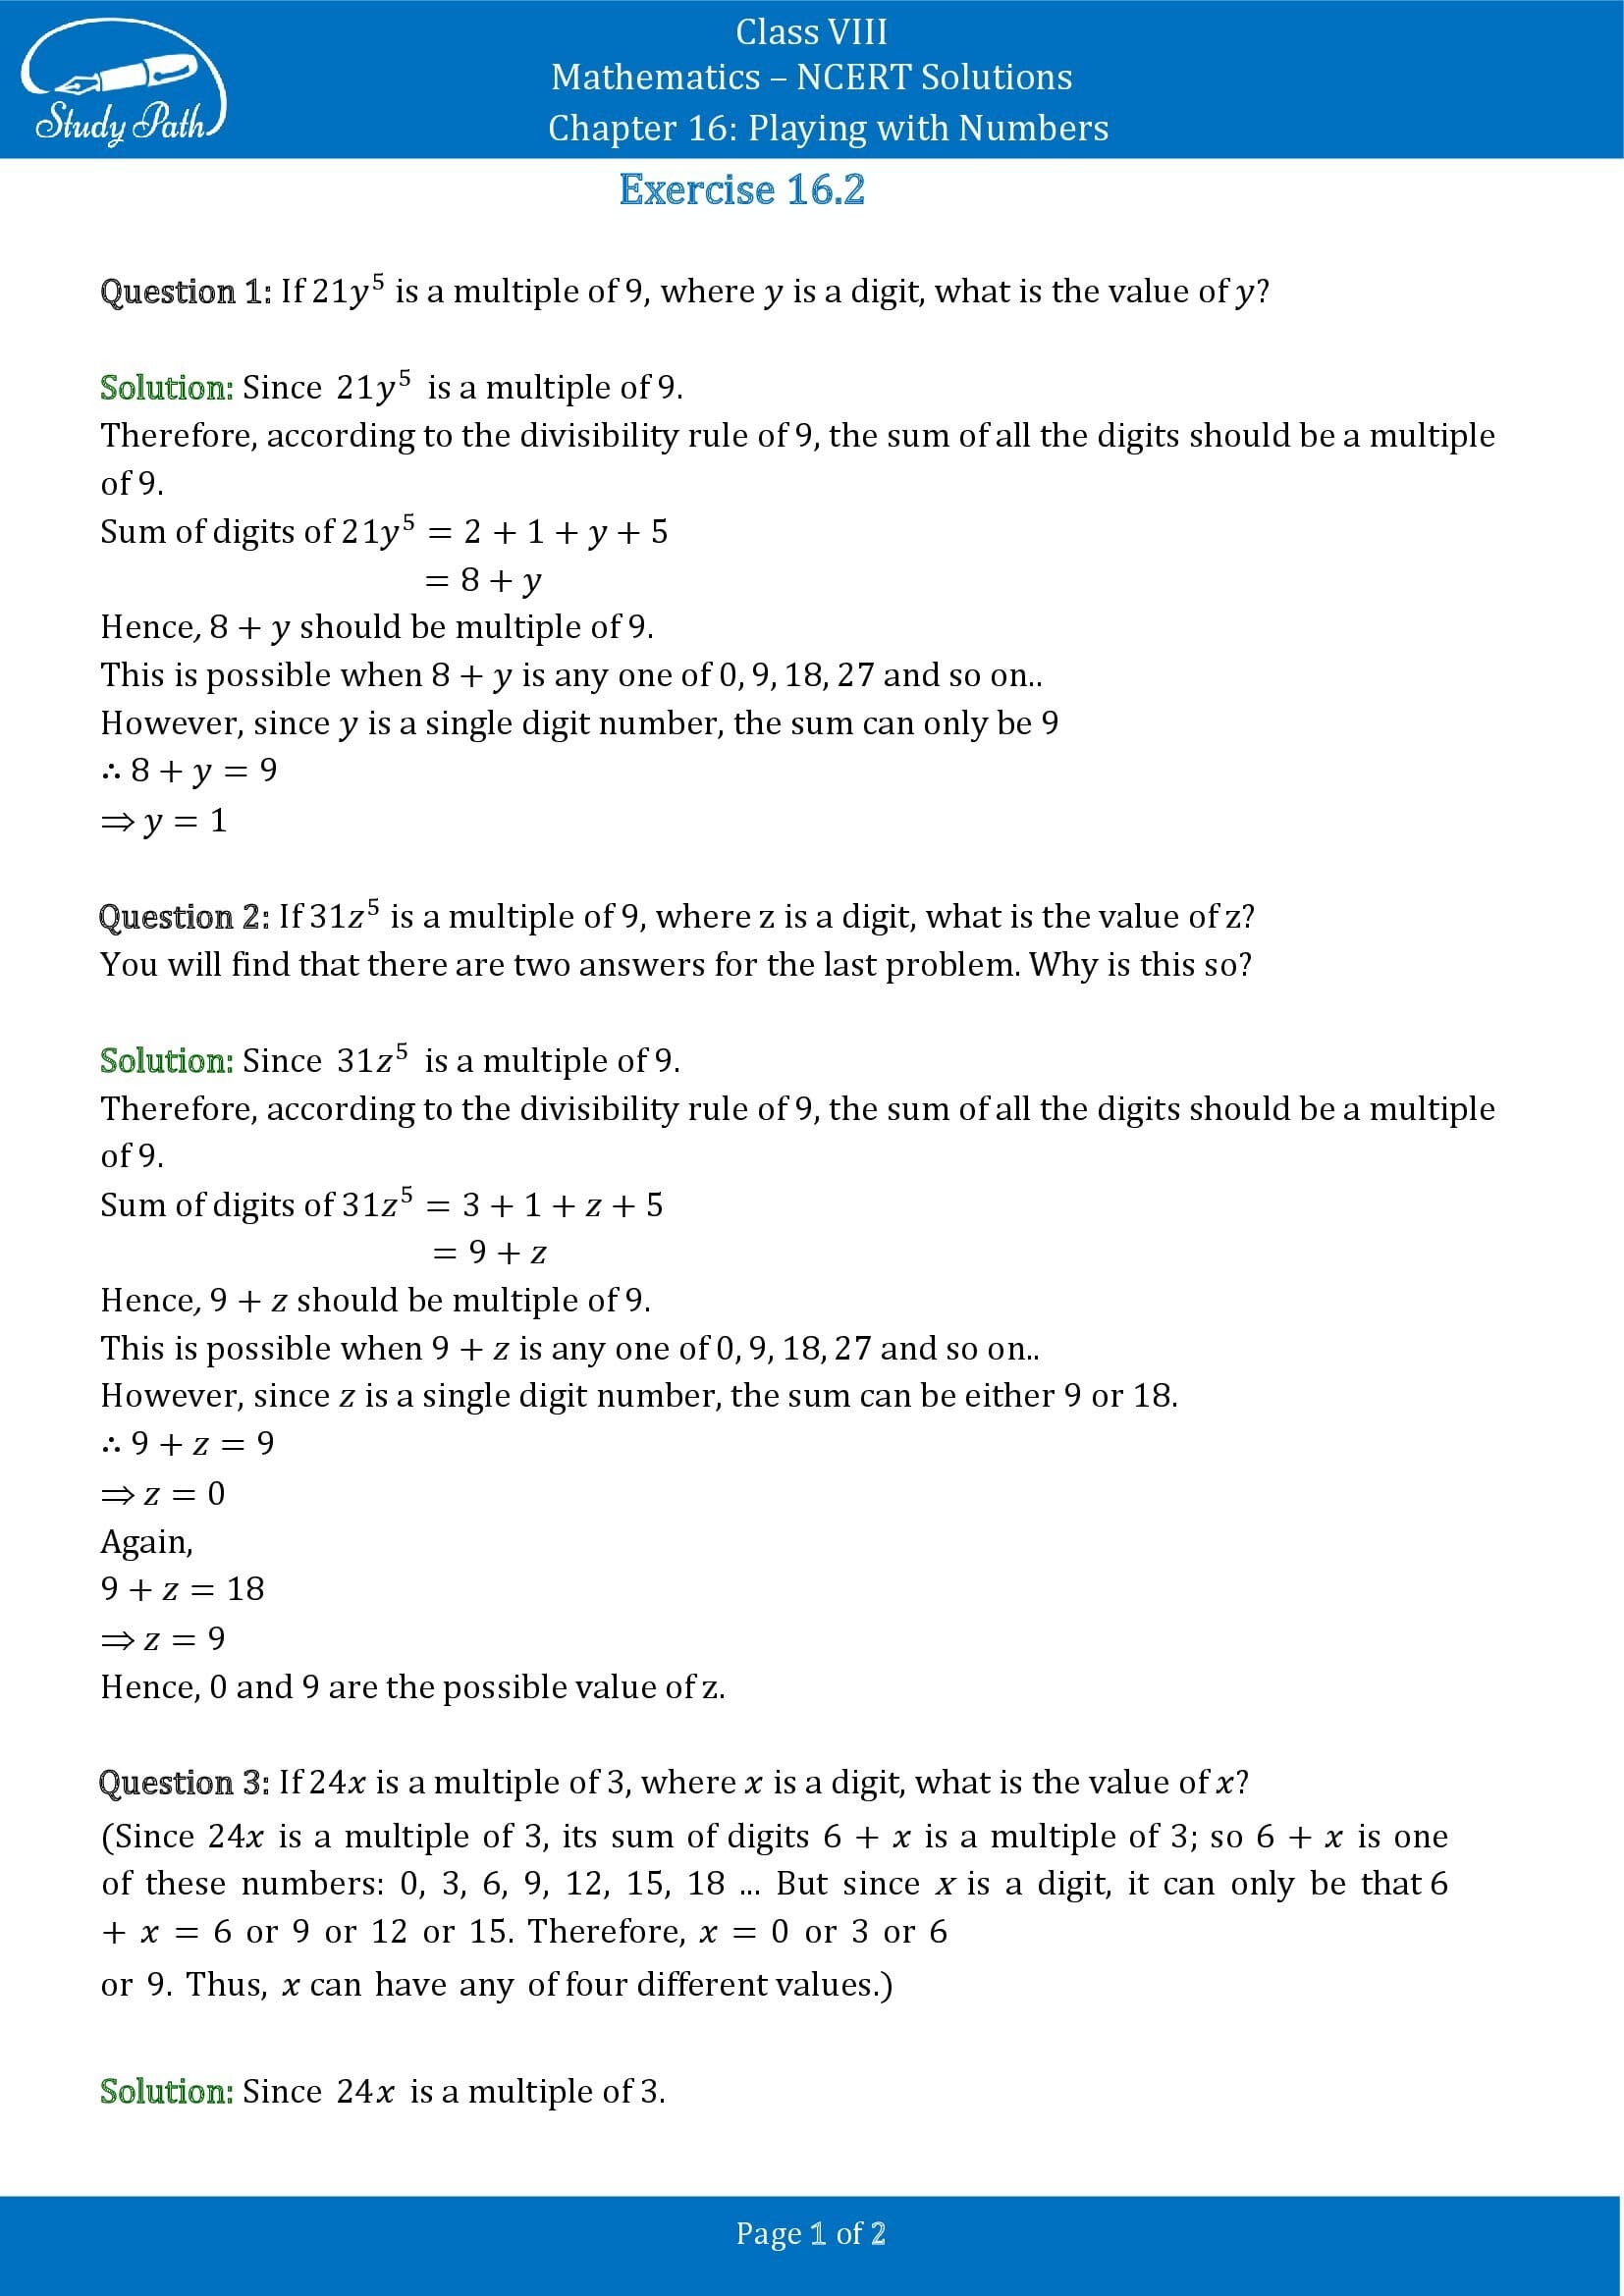 NCERT Solutions for Class 8 Maths Chapter 16 Playing with Numbers Exercise 16.2 00001